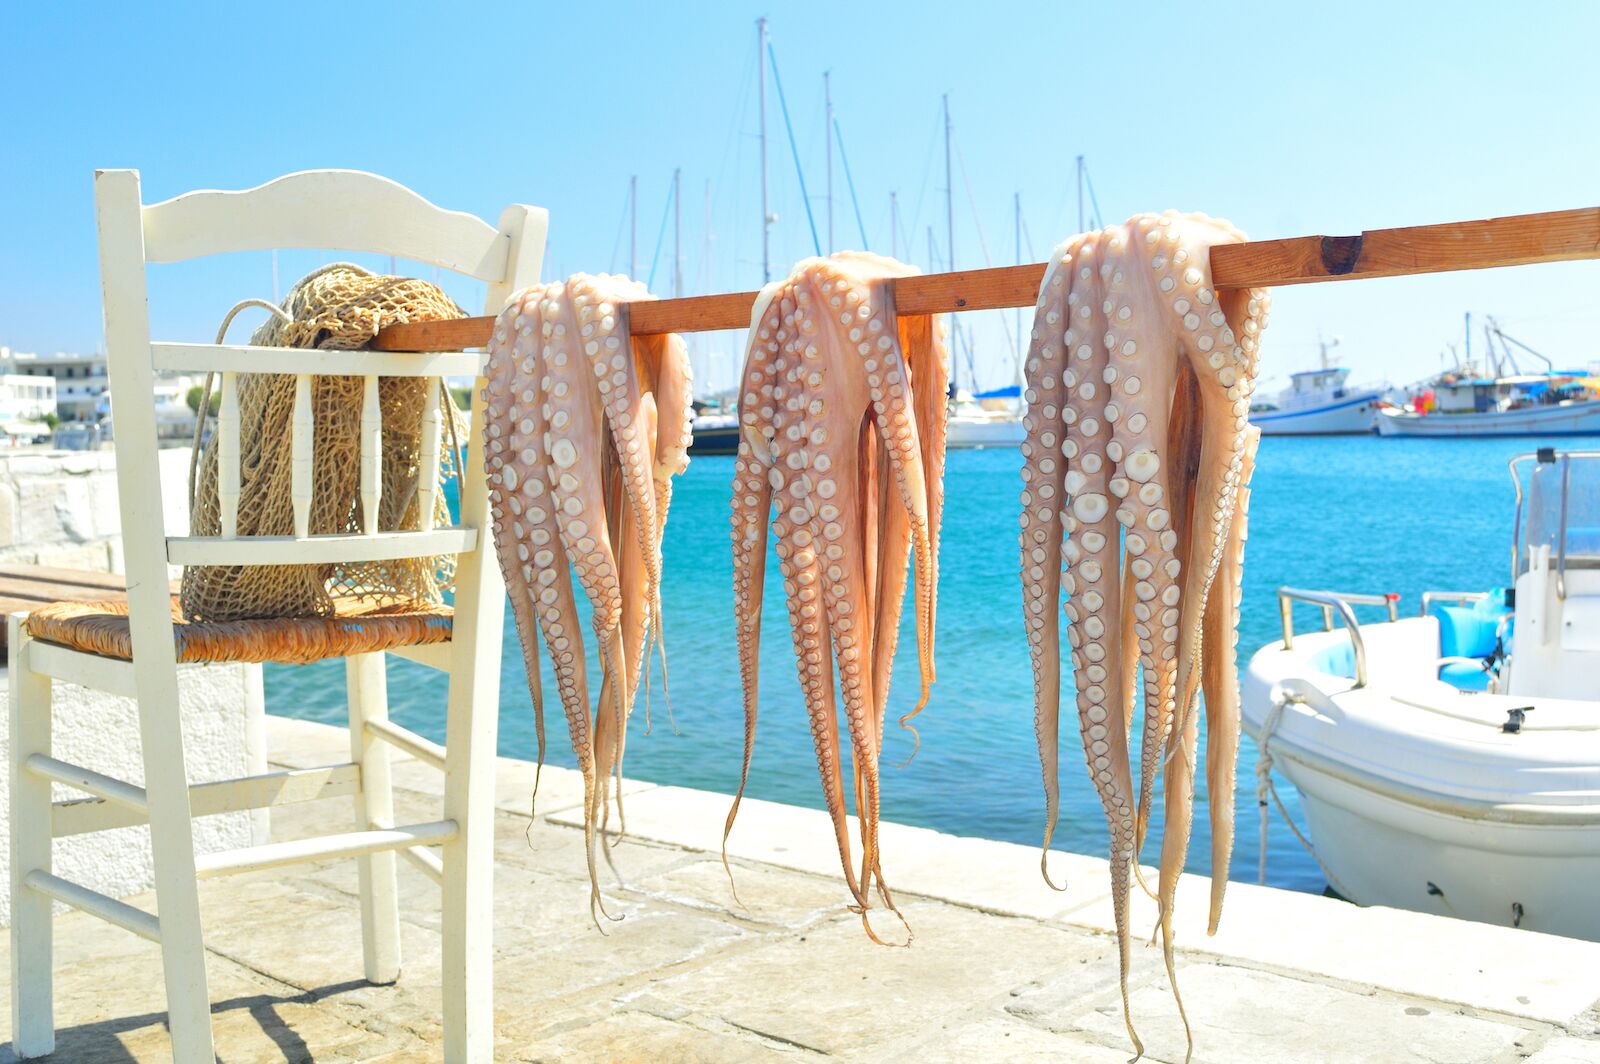 Octopus drying in the sun in Greece